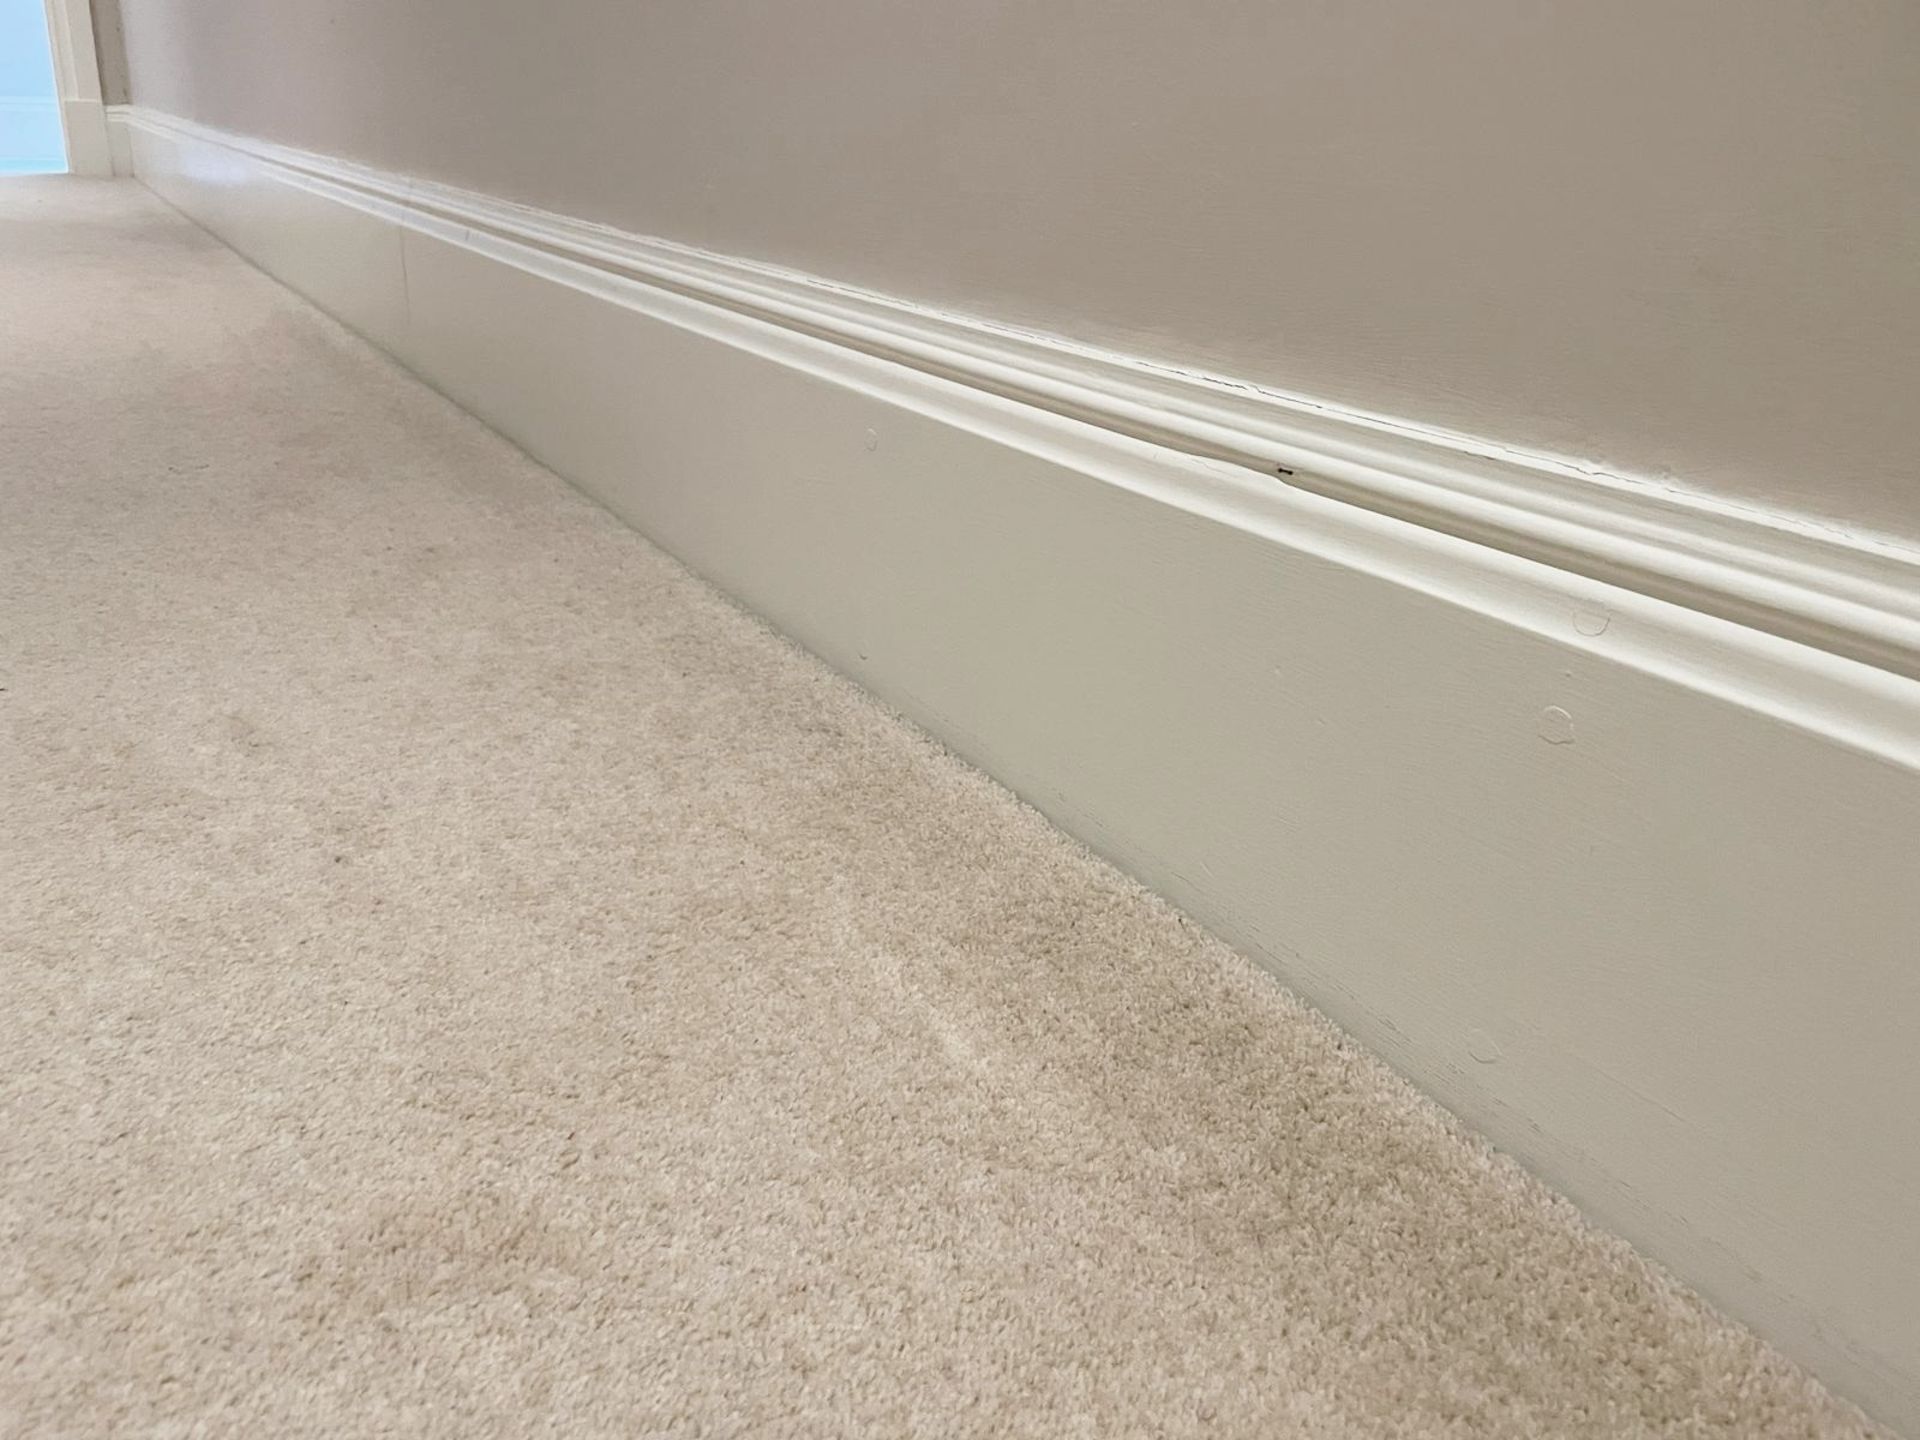 Approximately 15-Metres of Painted Timber Wooden Skirting Boards, In White - Ref: PAN257 - Bild 2 aus 2